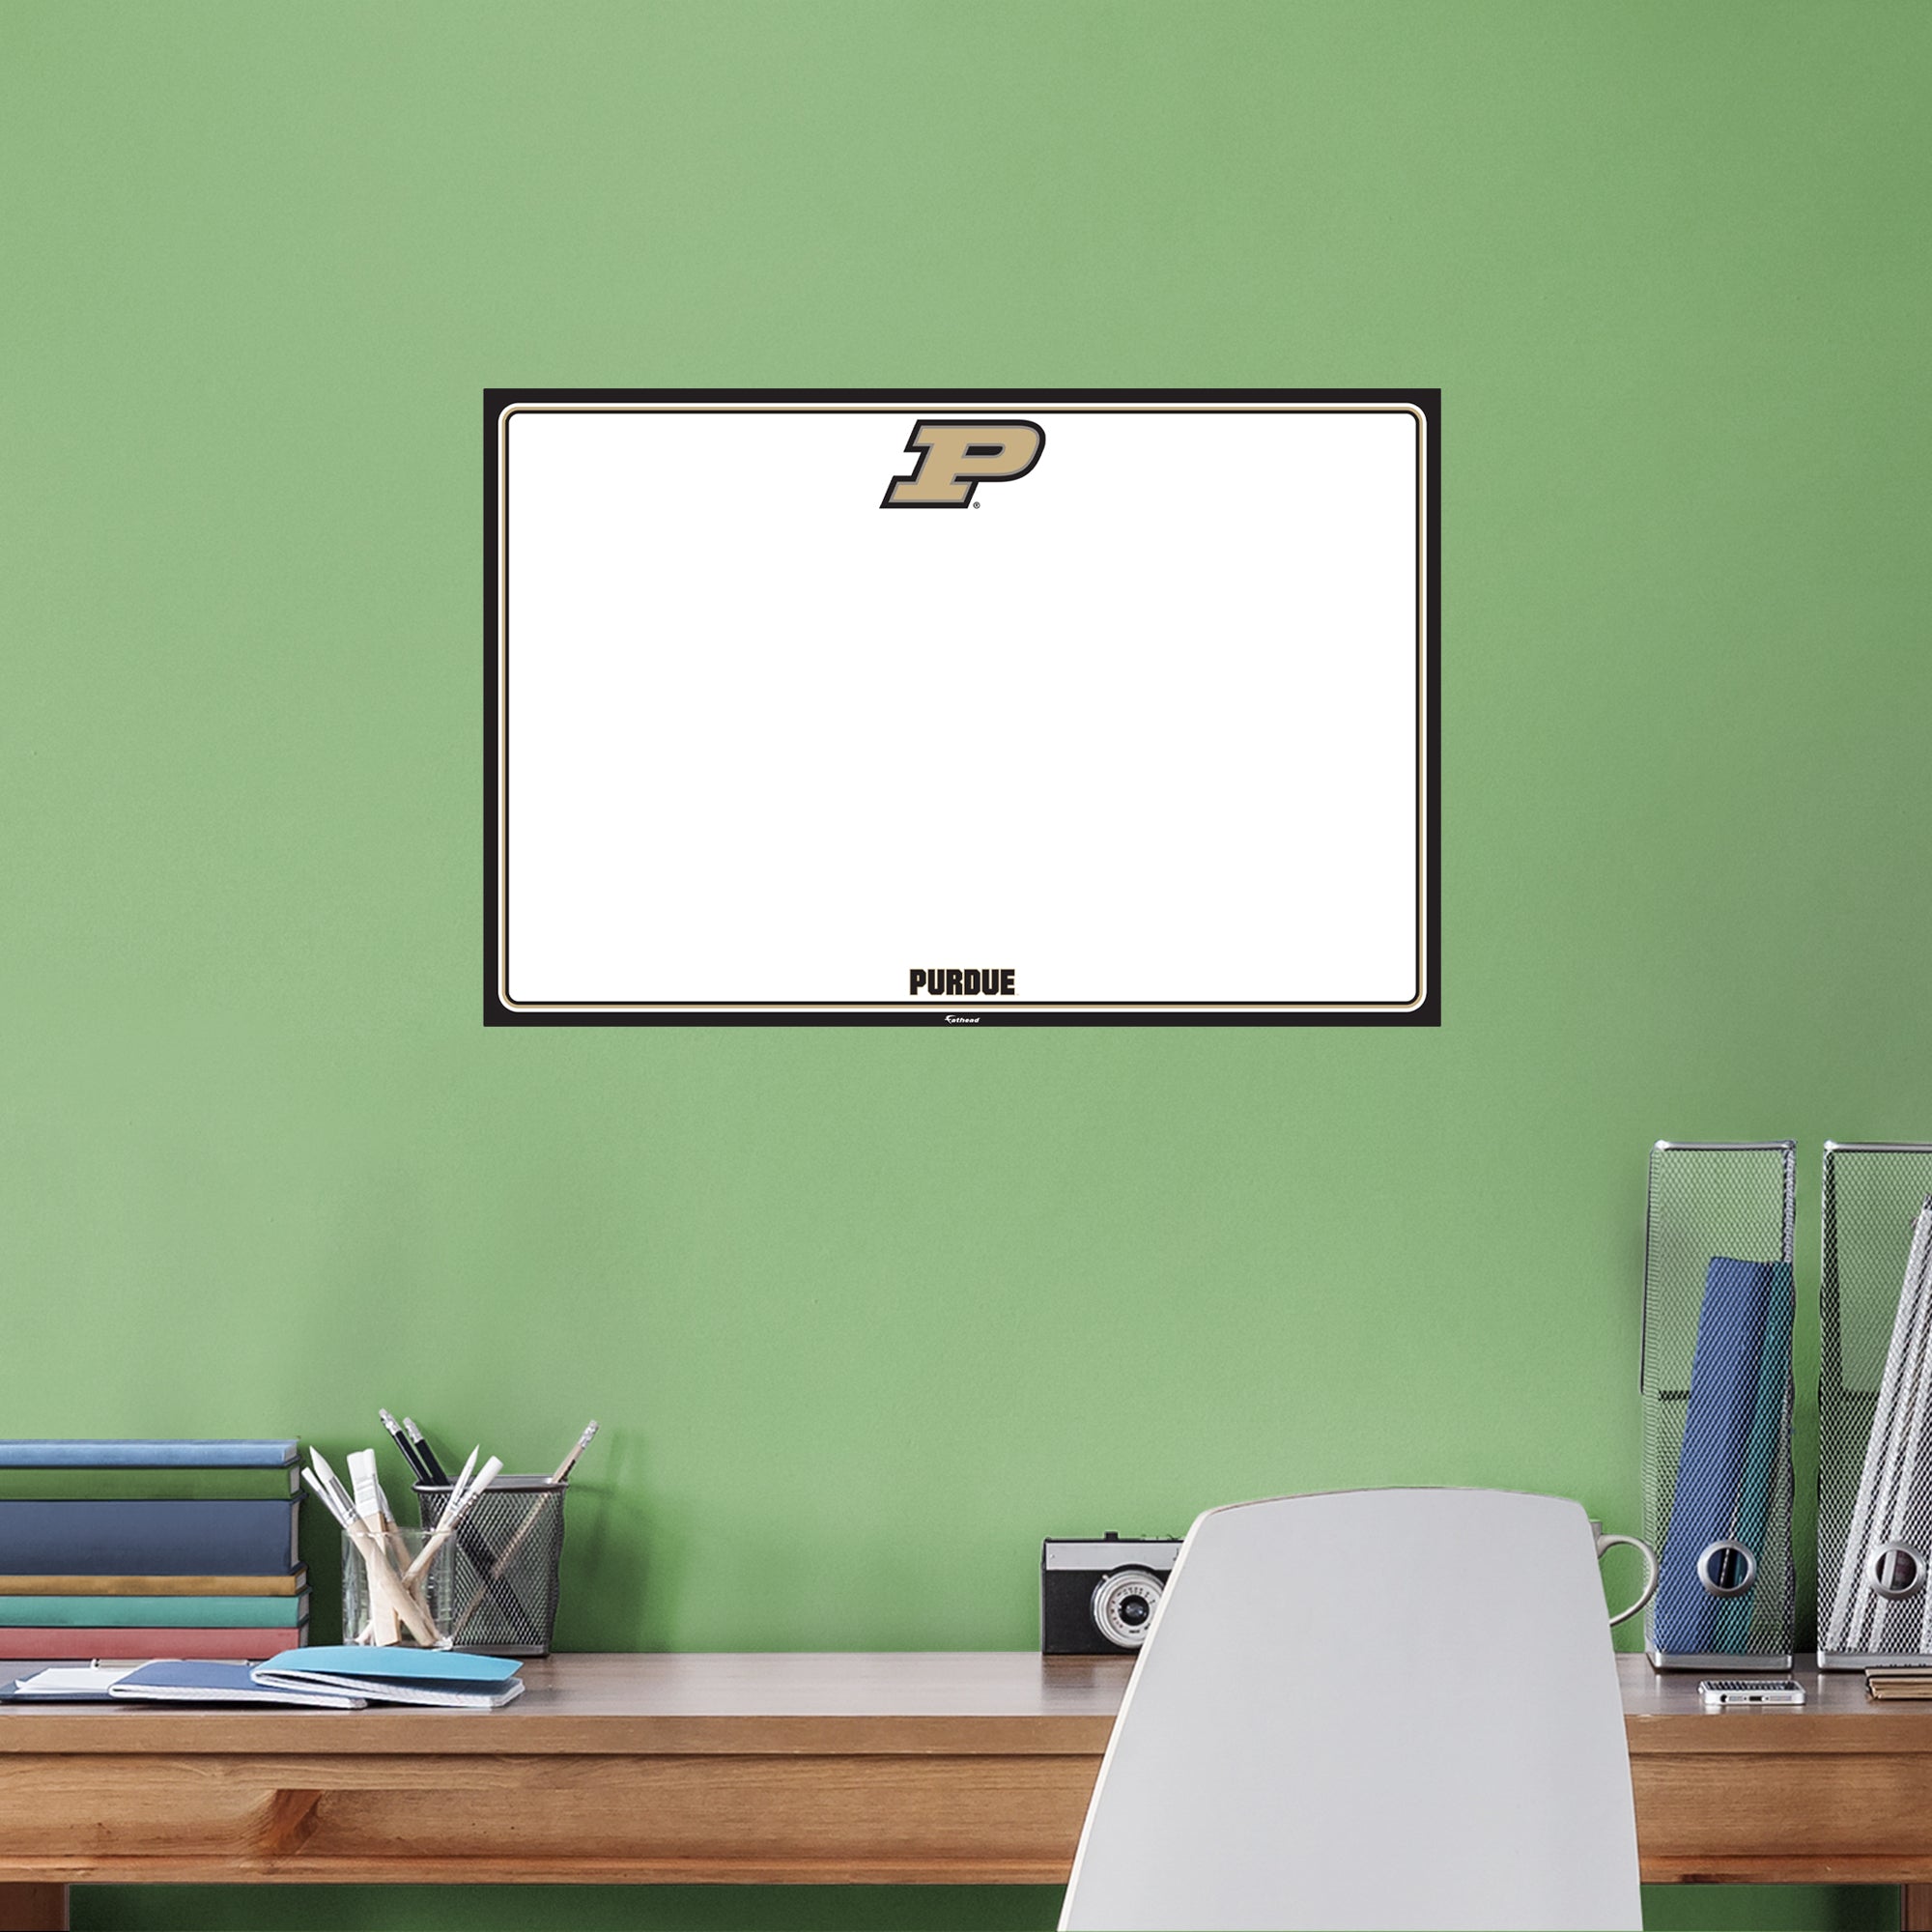 Purdue Boilermakers 2020 X-Large Dry Erase Whiteboard - Officially Licensed NCAA Removable Wall Decal XL by Fathead | Vinyl